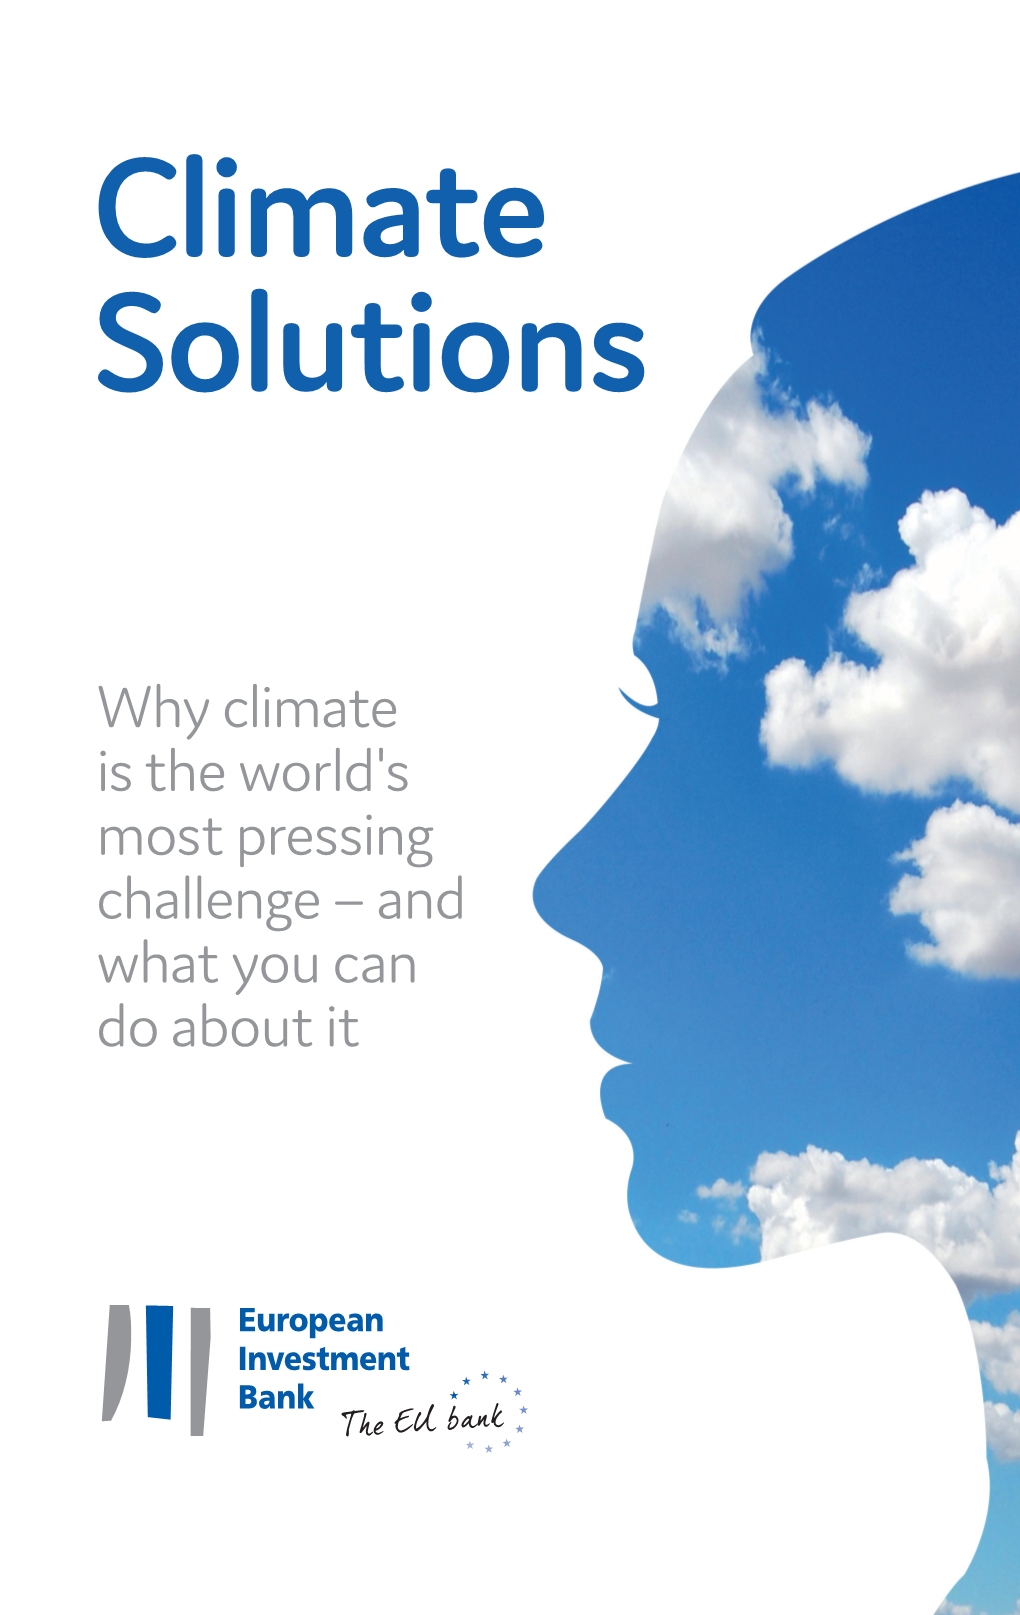 Climate Solutions: Why Climate Is the World's